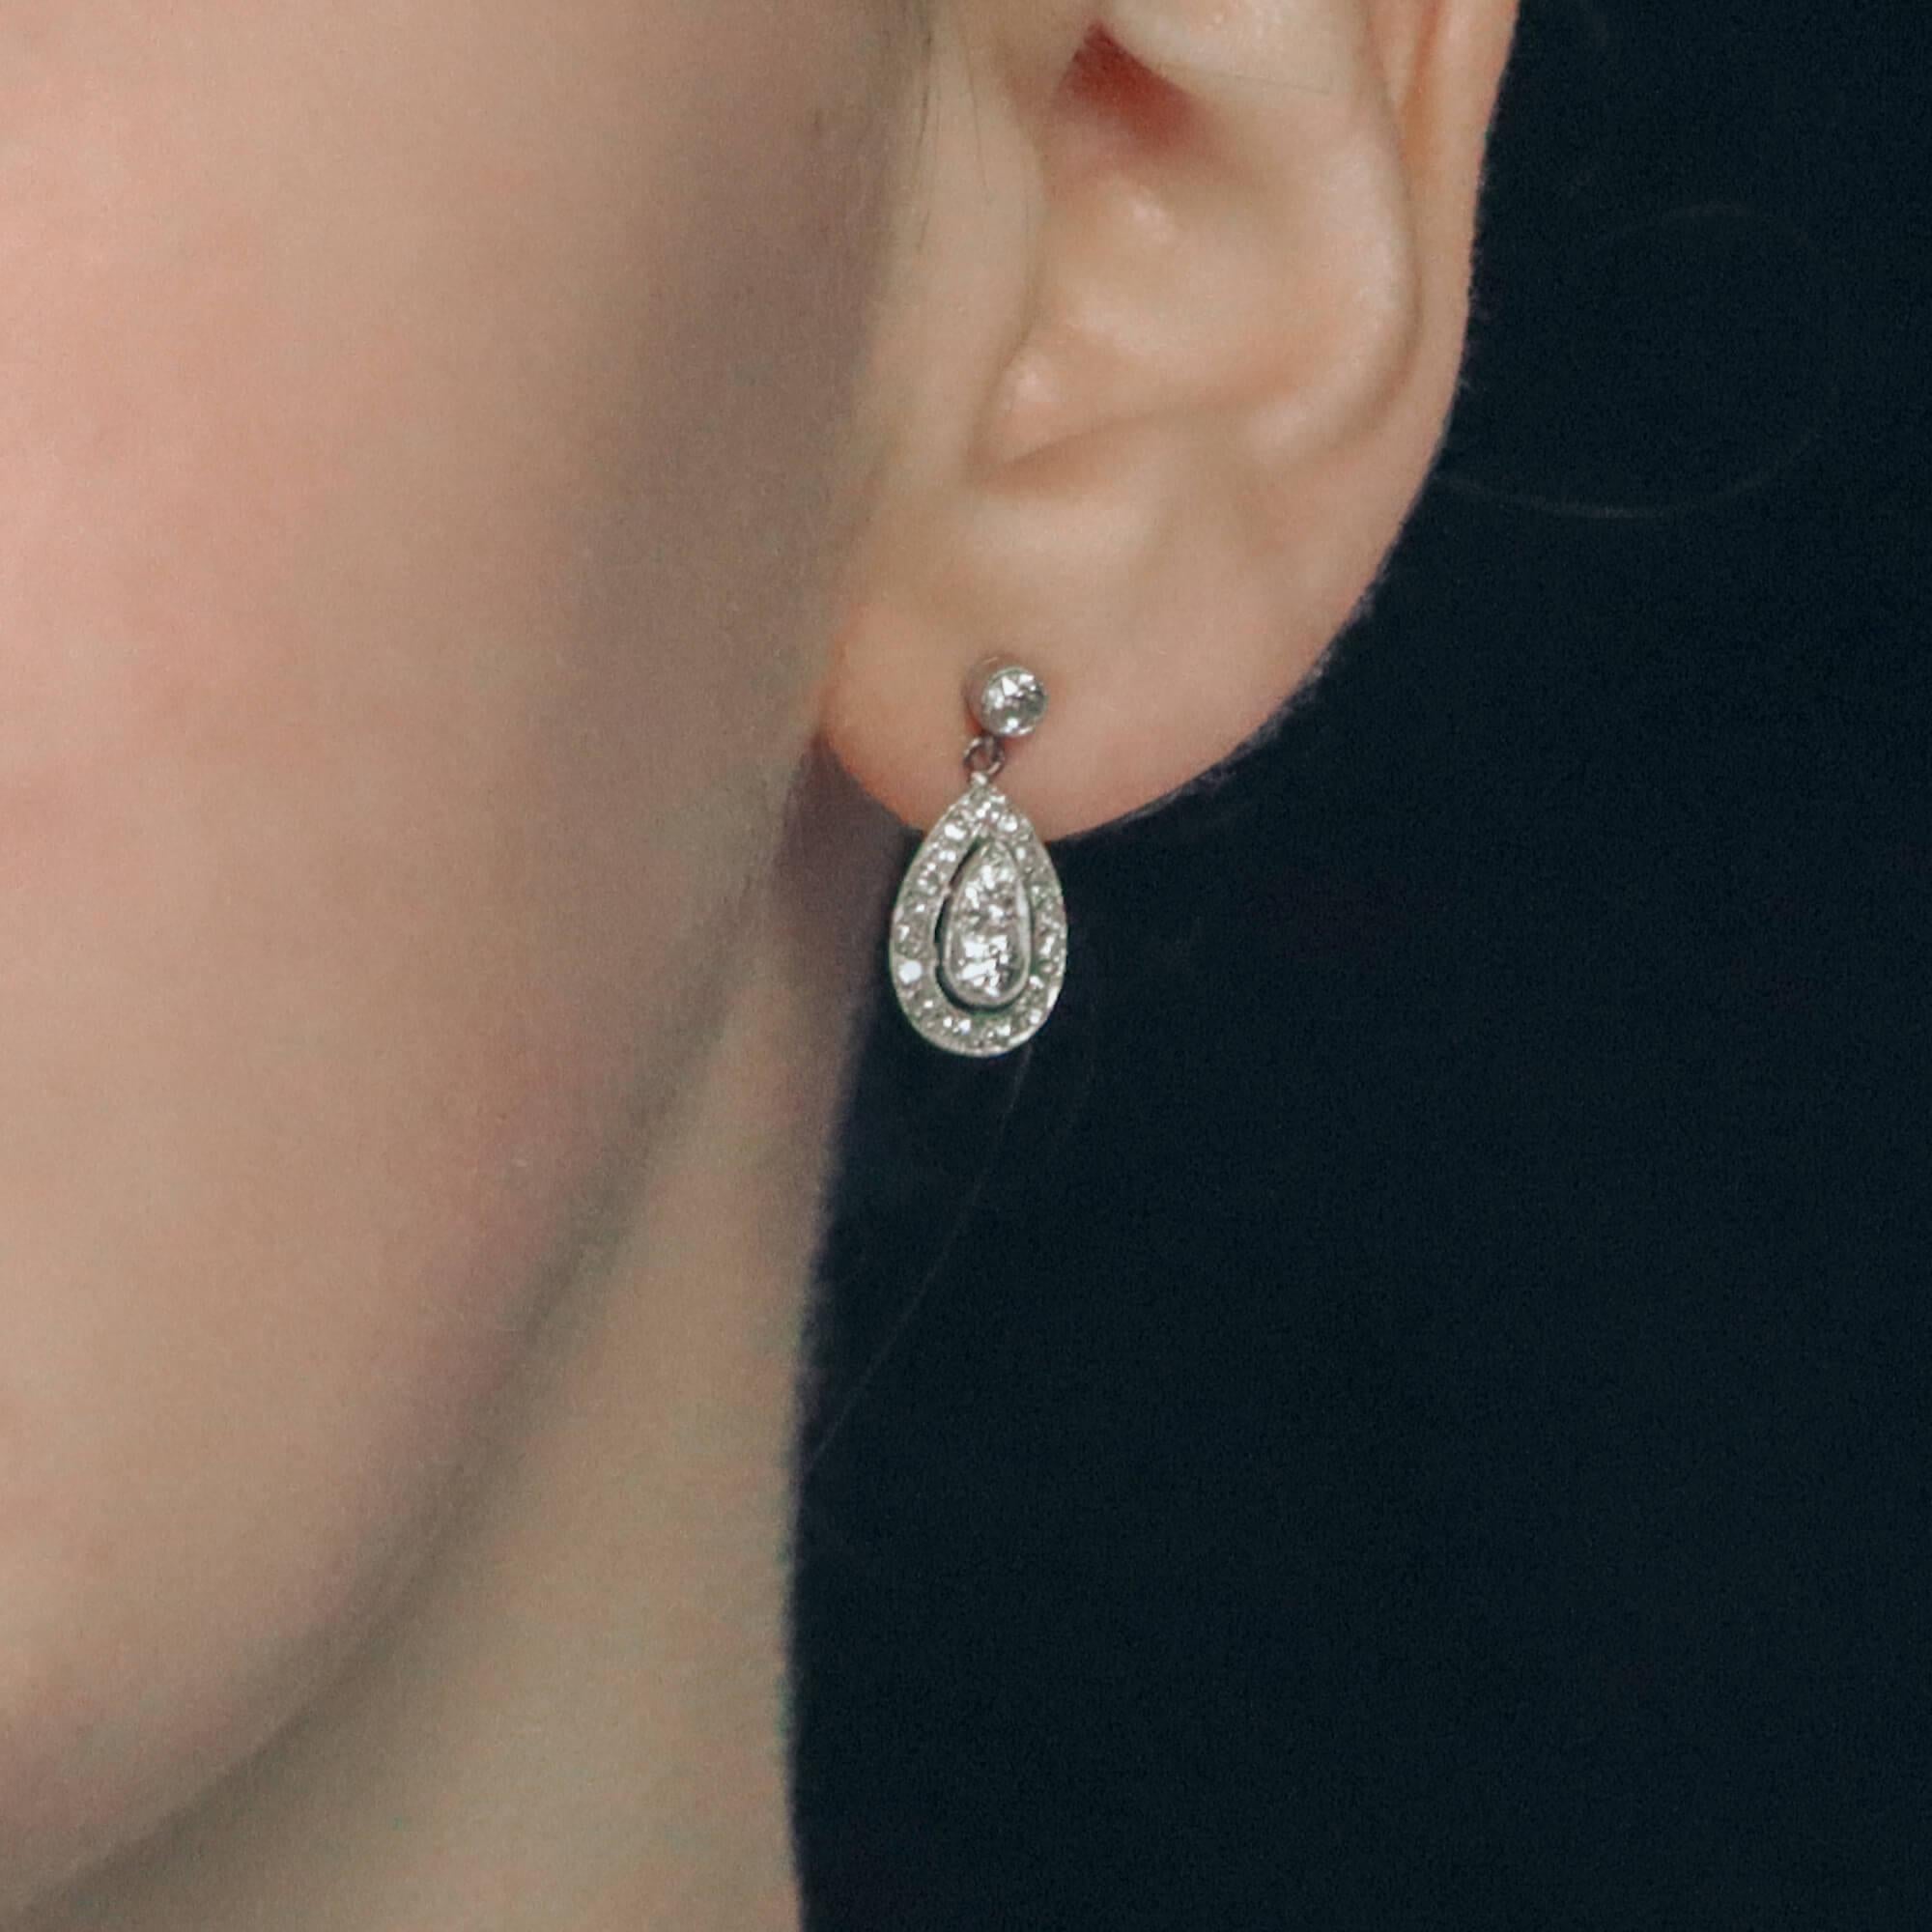 A pair of Edwardian diamond drop earrings in platinum. 
Each earring is designed as a millegrain-set Old European brilliant-cut diamond suspending an articulated pear-shape drop composed of two grain-set Old Mine-cut diamonds amidst a halo of 19